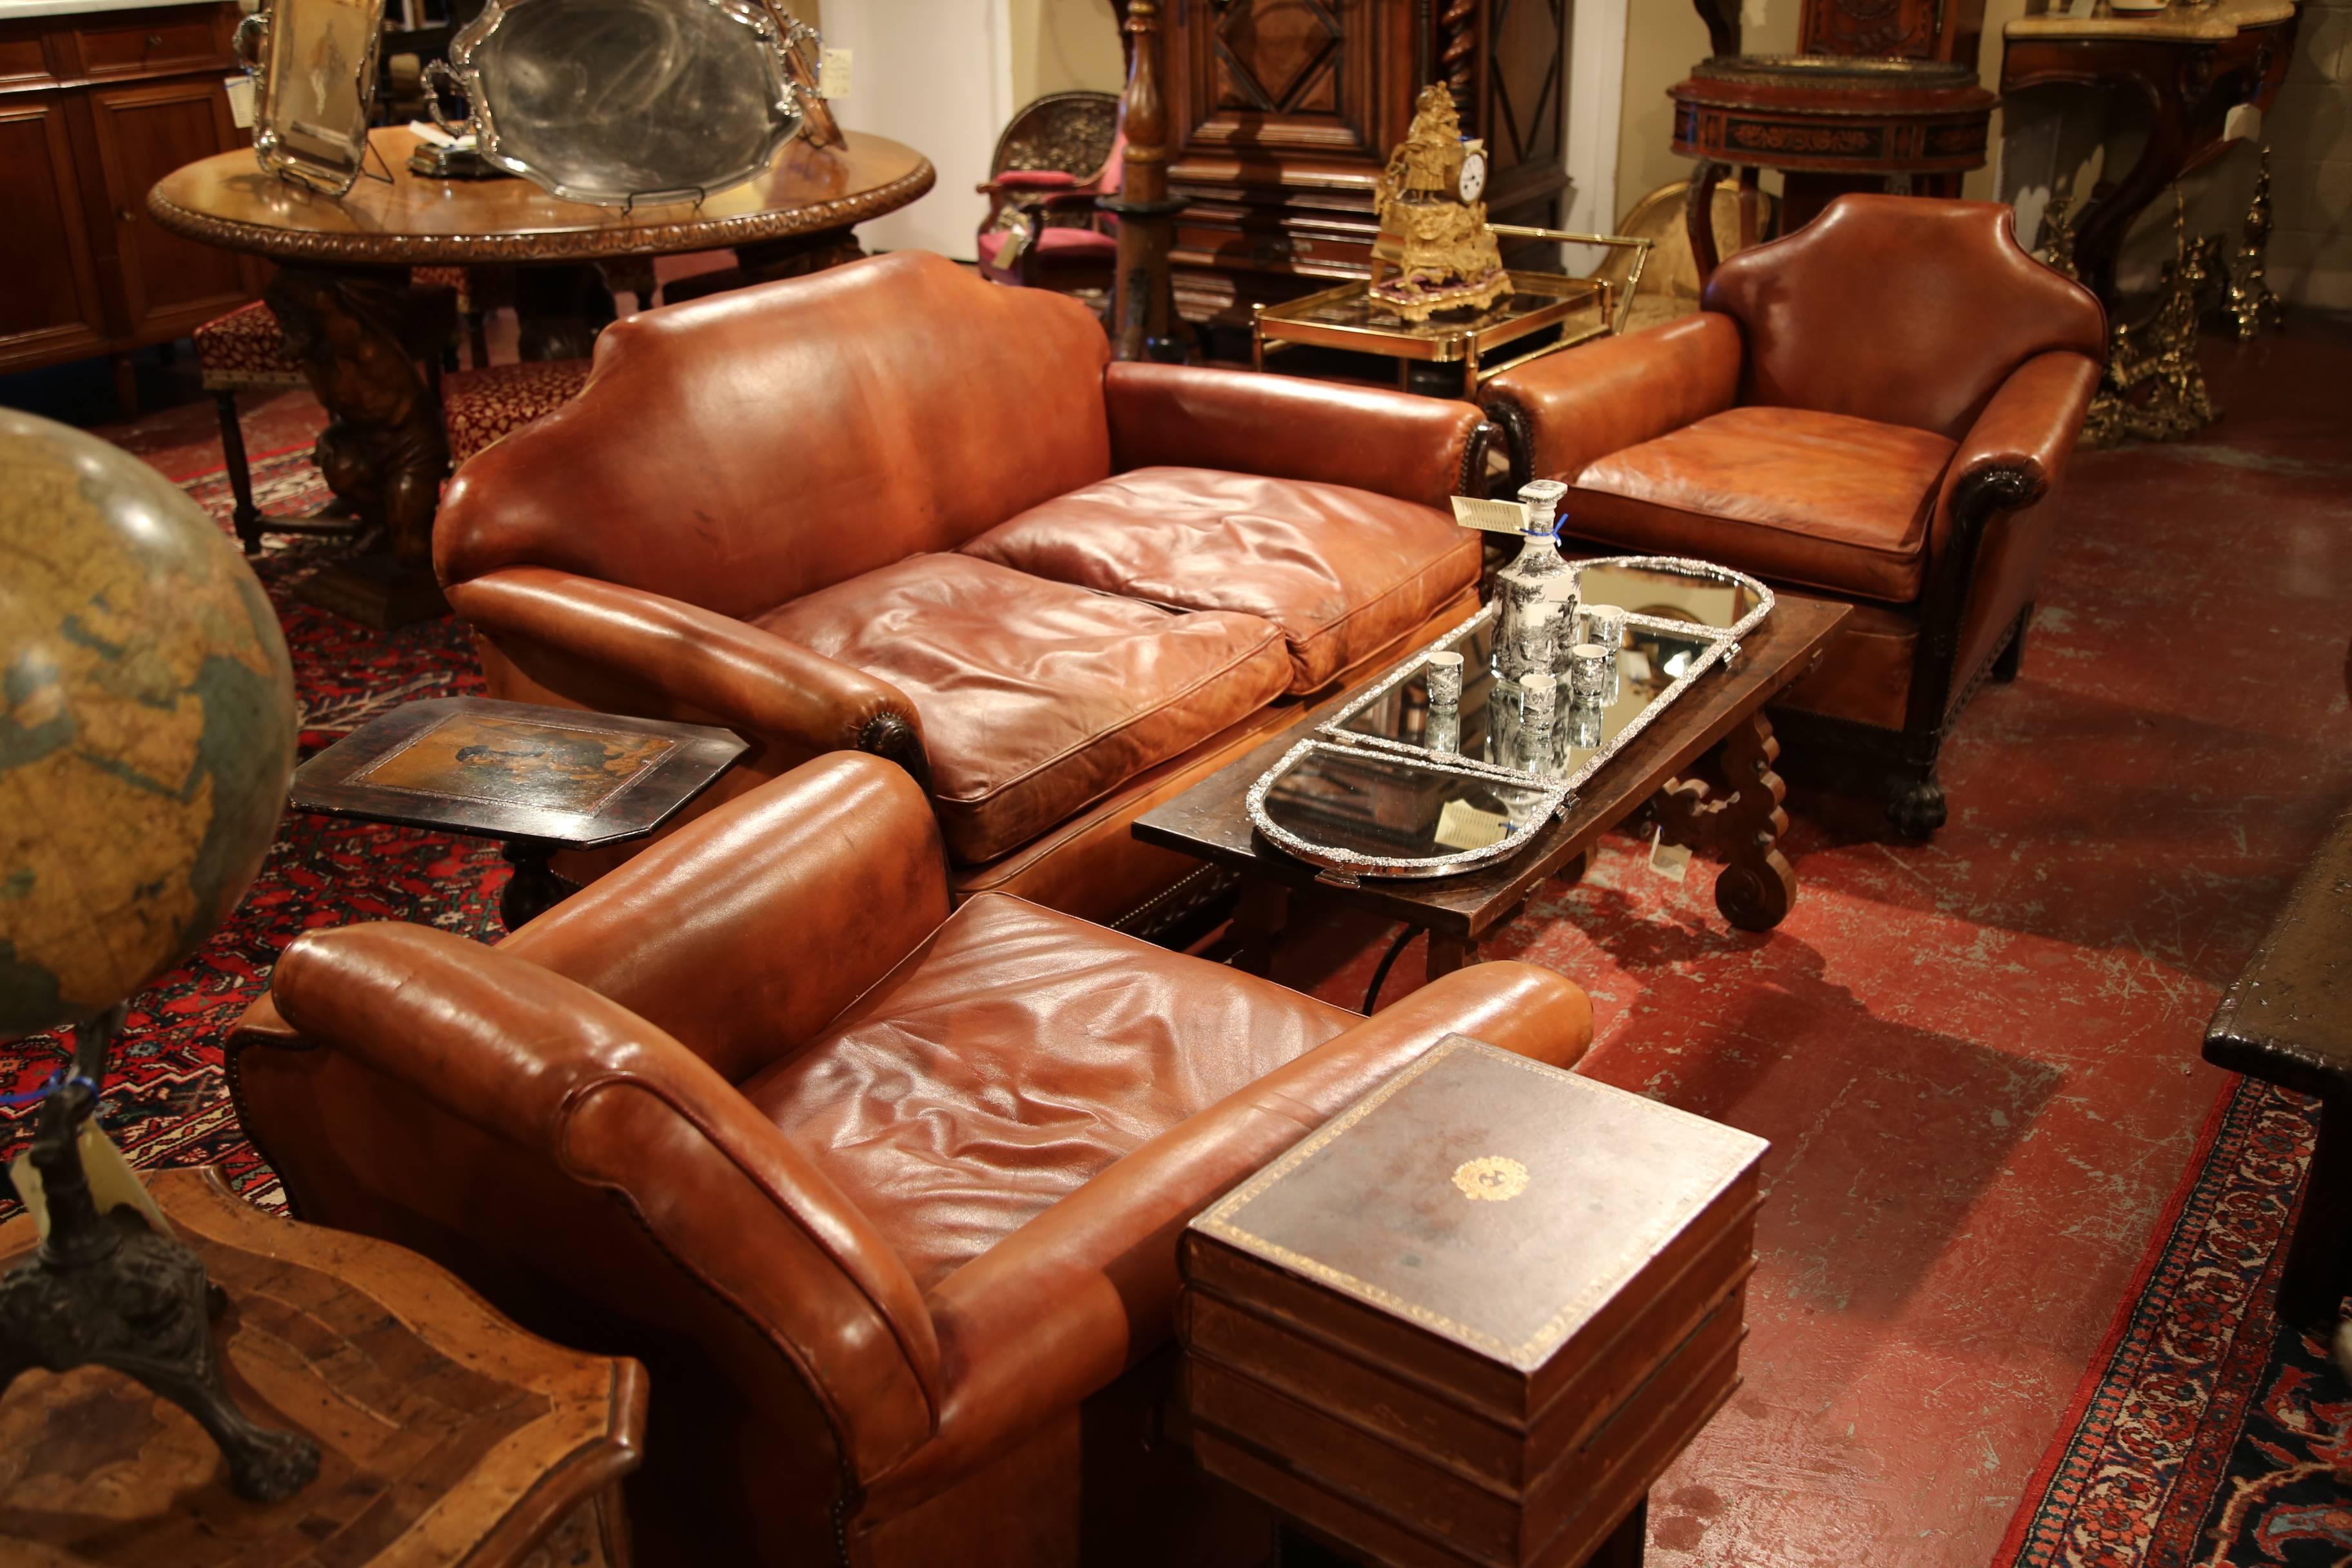 Add comfort, beauty and charm to your living room or study with this exquisite set of antique leather salon seating. Crafted in England, circa 1890, this set includes a sofa and a pair of matching armchairs. All three pieces are covered with